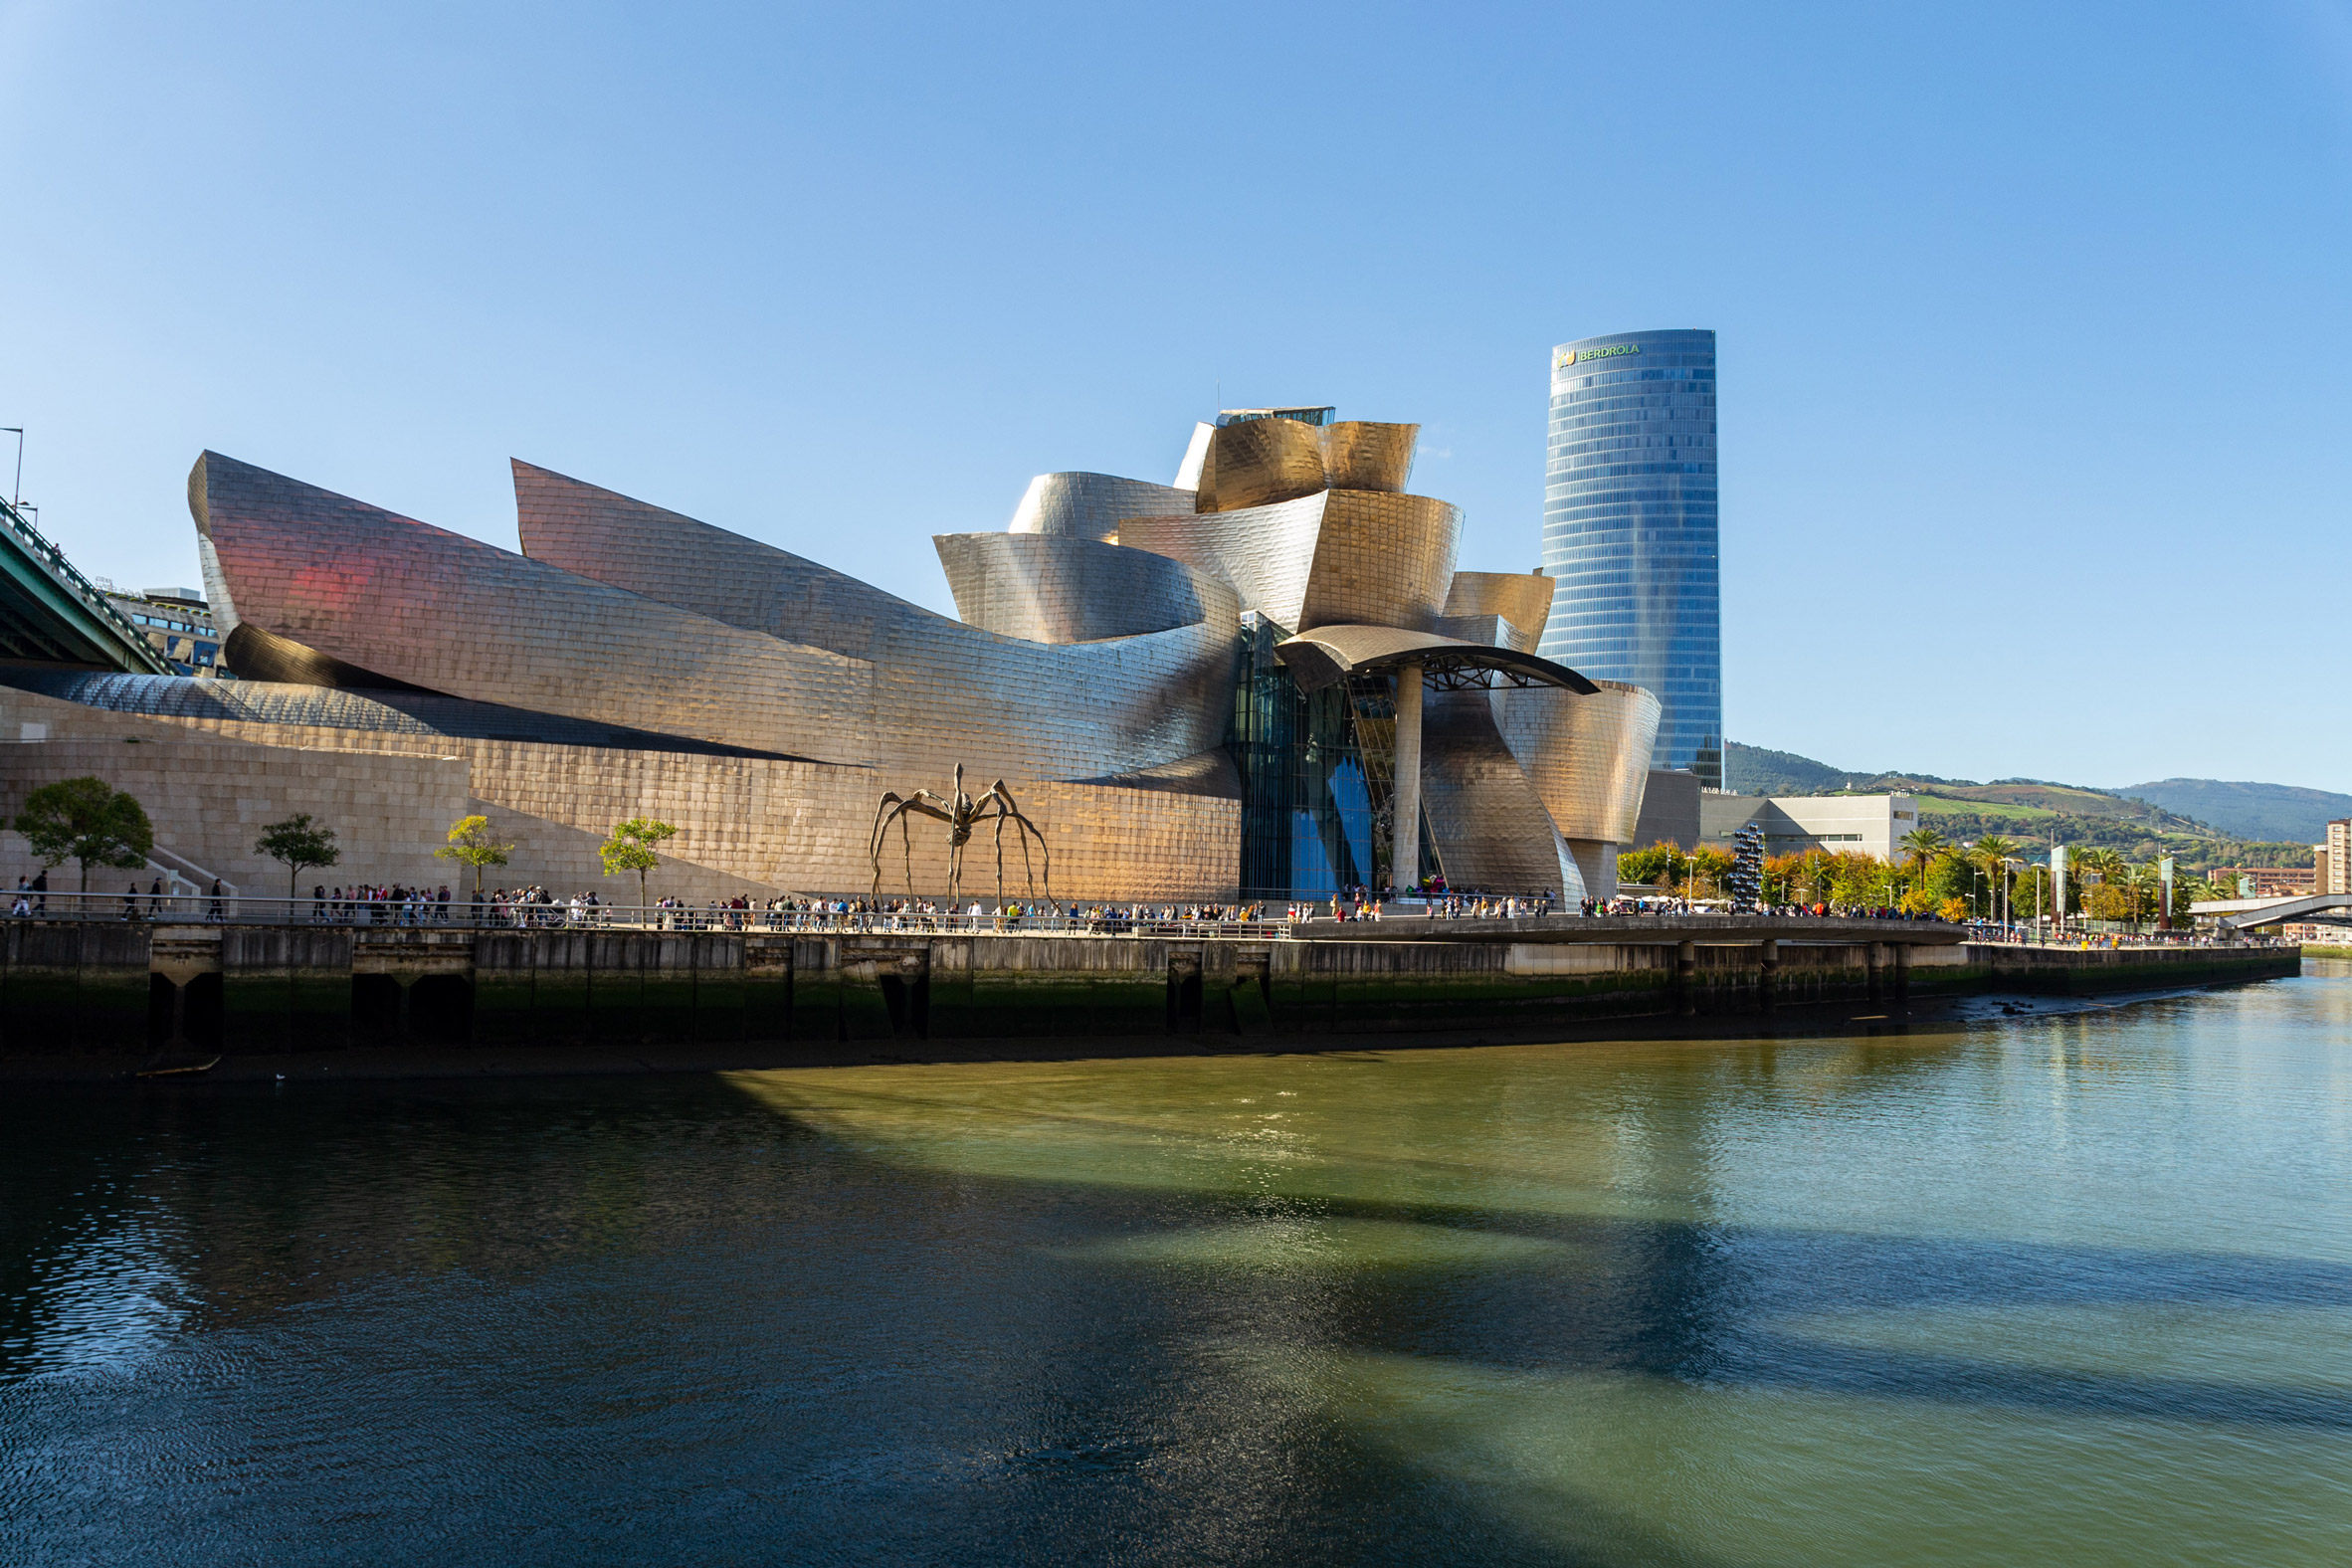 Frank Gehry brought global attention to deconstructivism